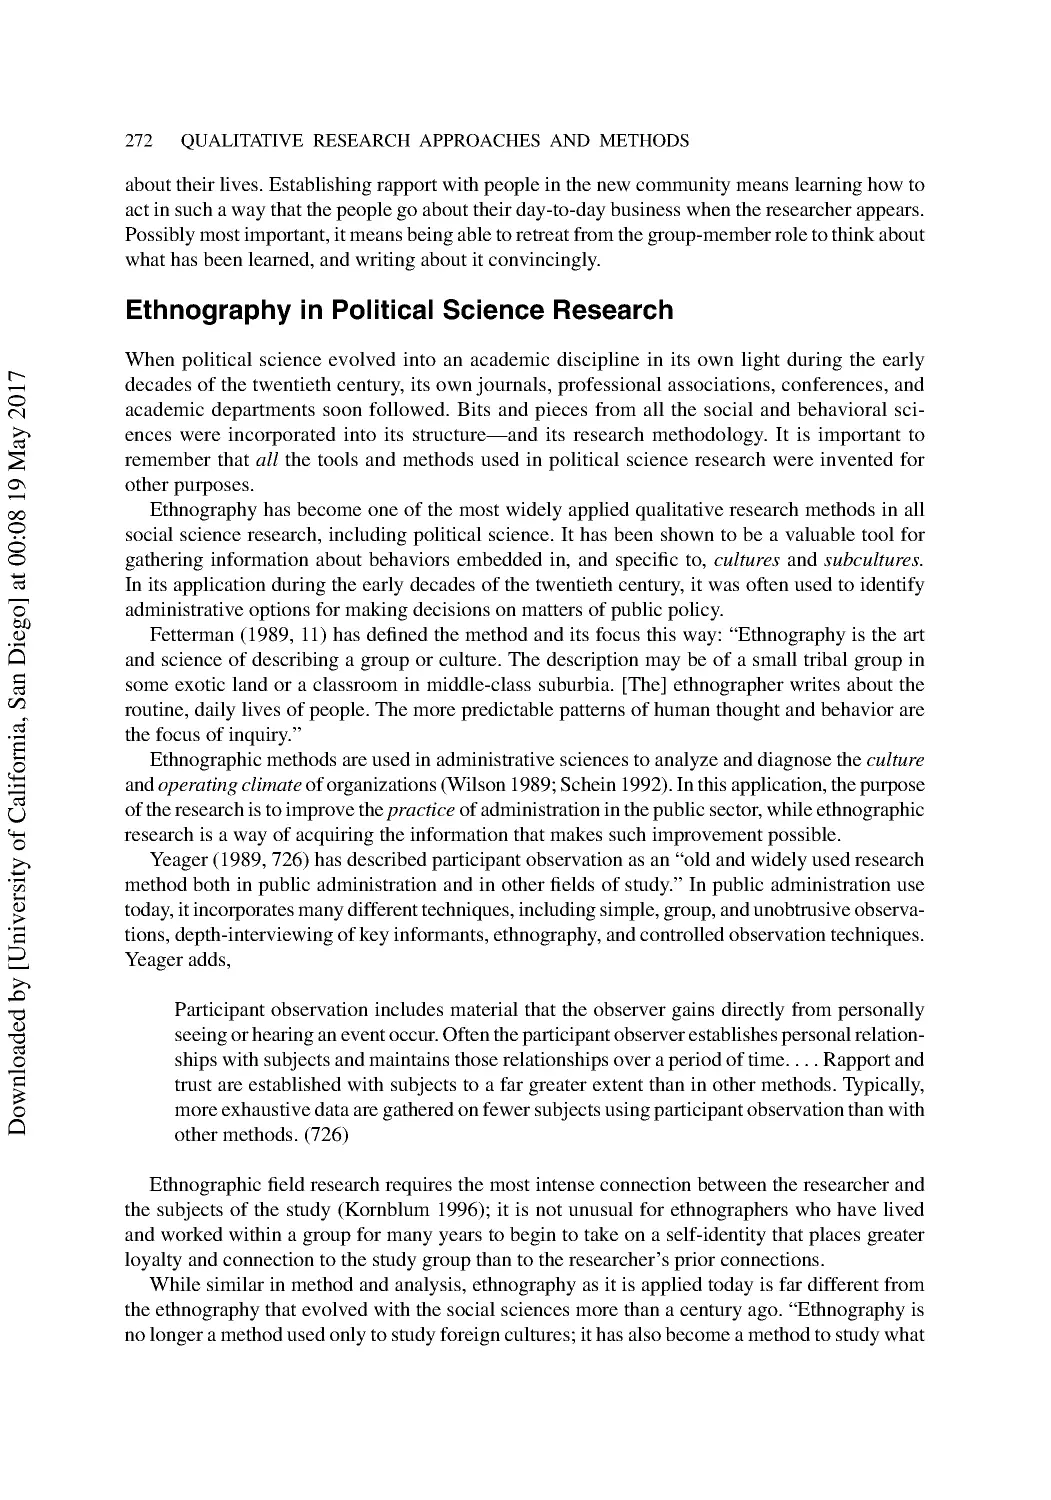 Ethnography in Political Science Research